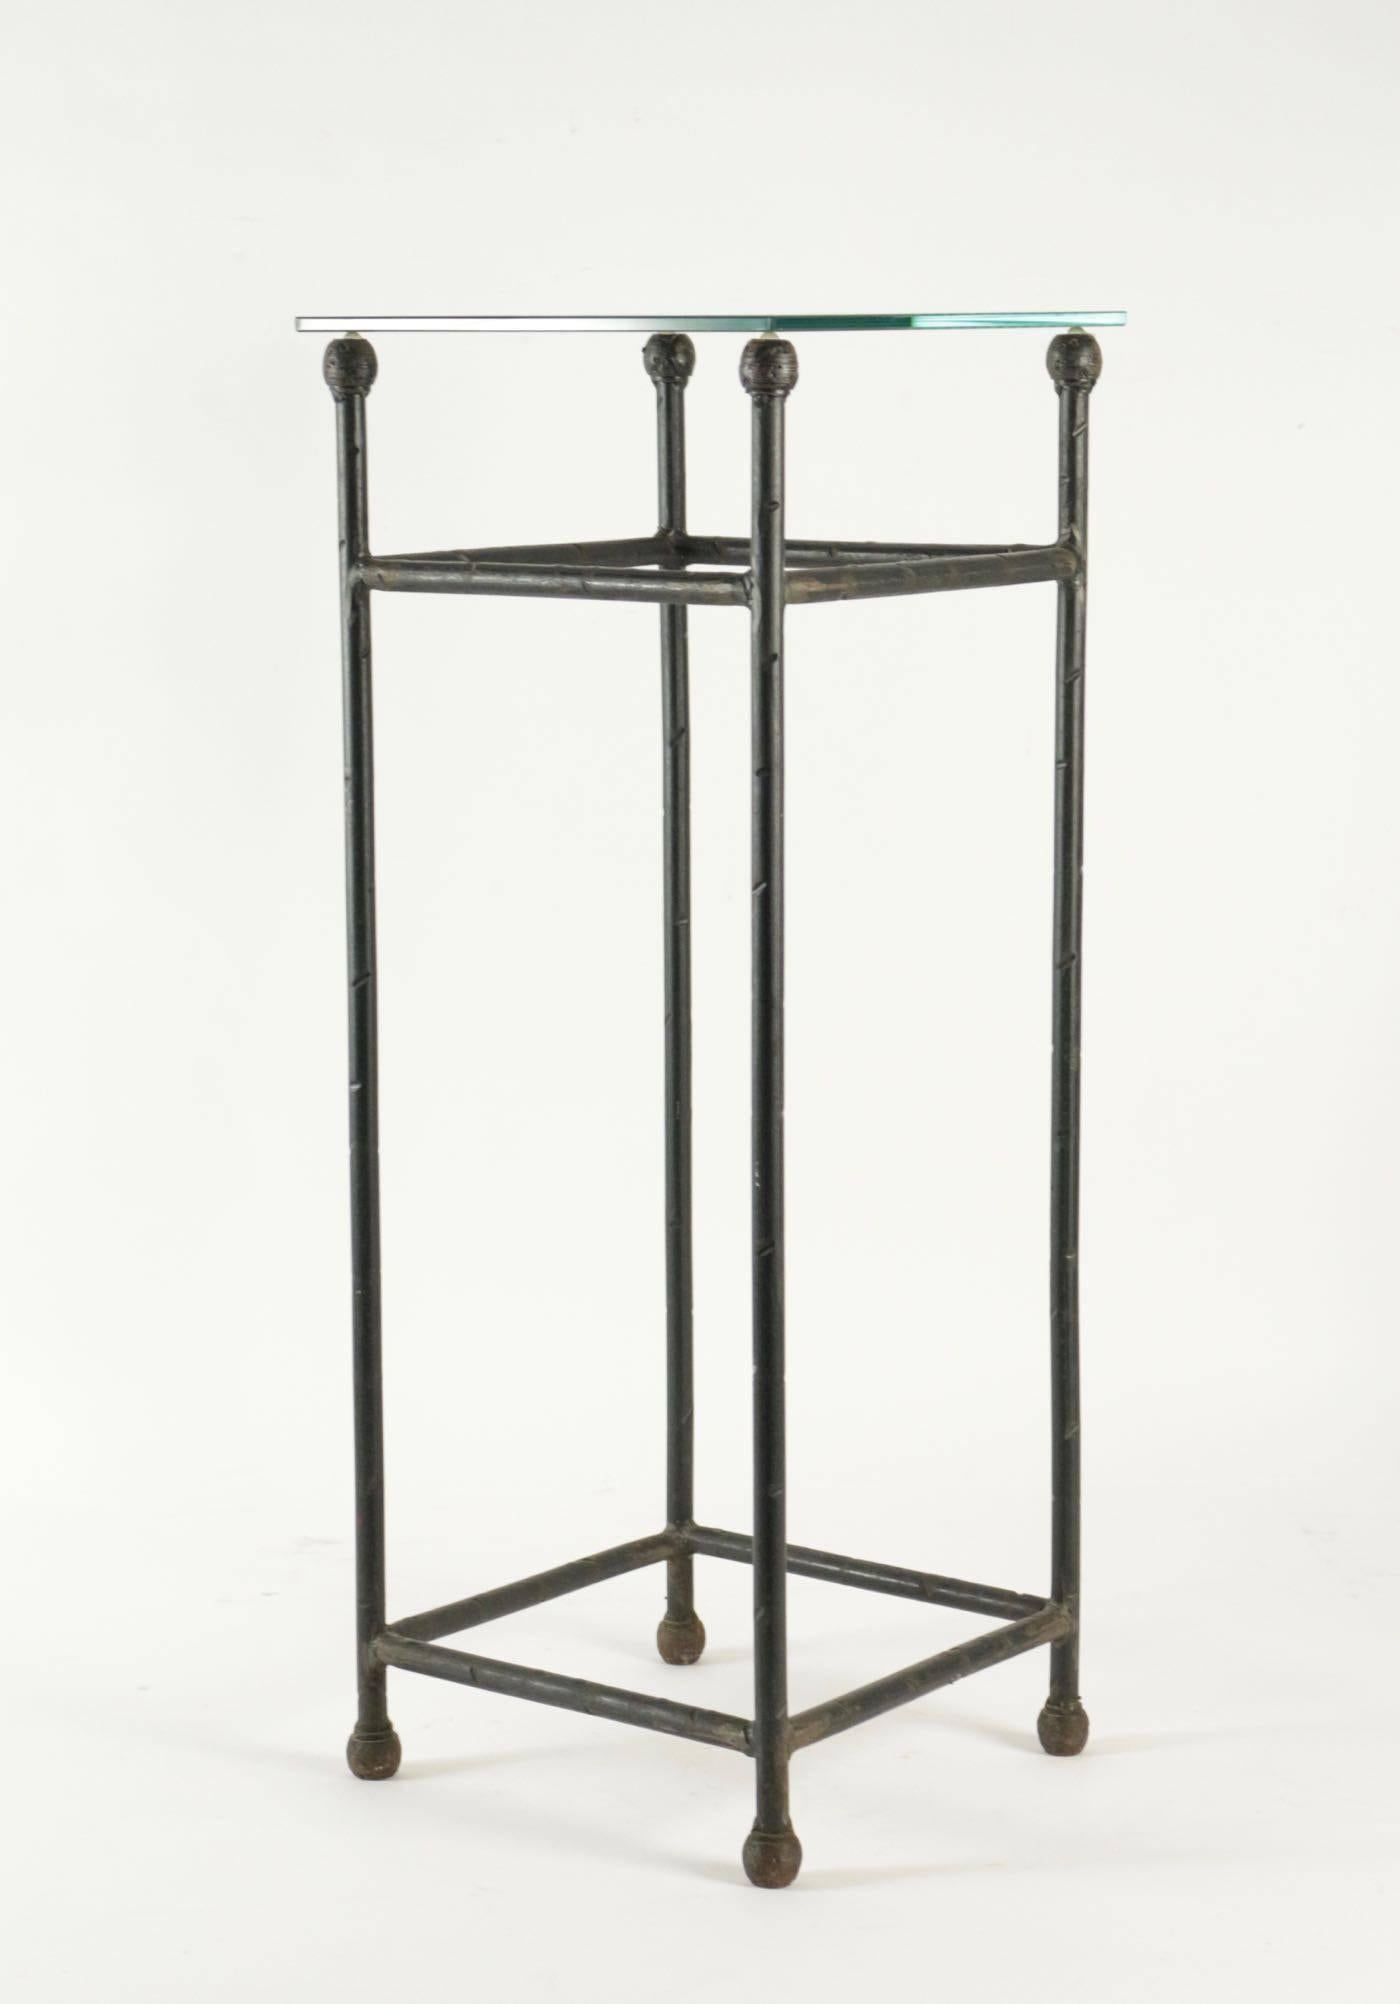 Two Consoles in Wrought Iron under Glass in an Industrial Style 20th Century For Sale 2